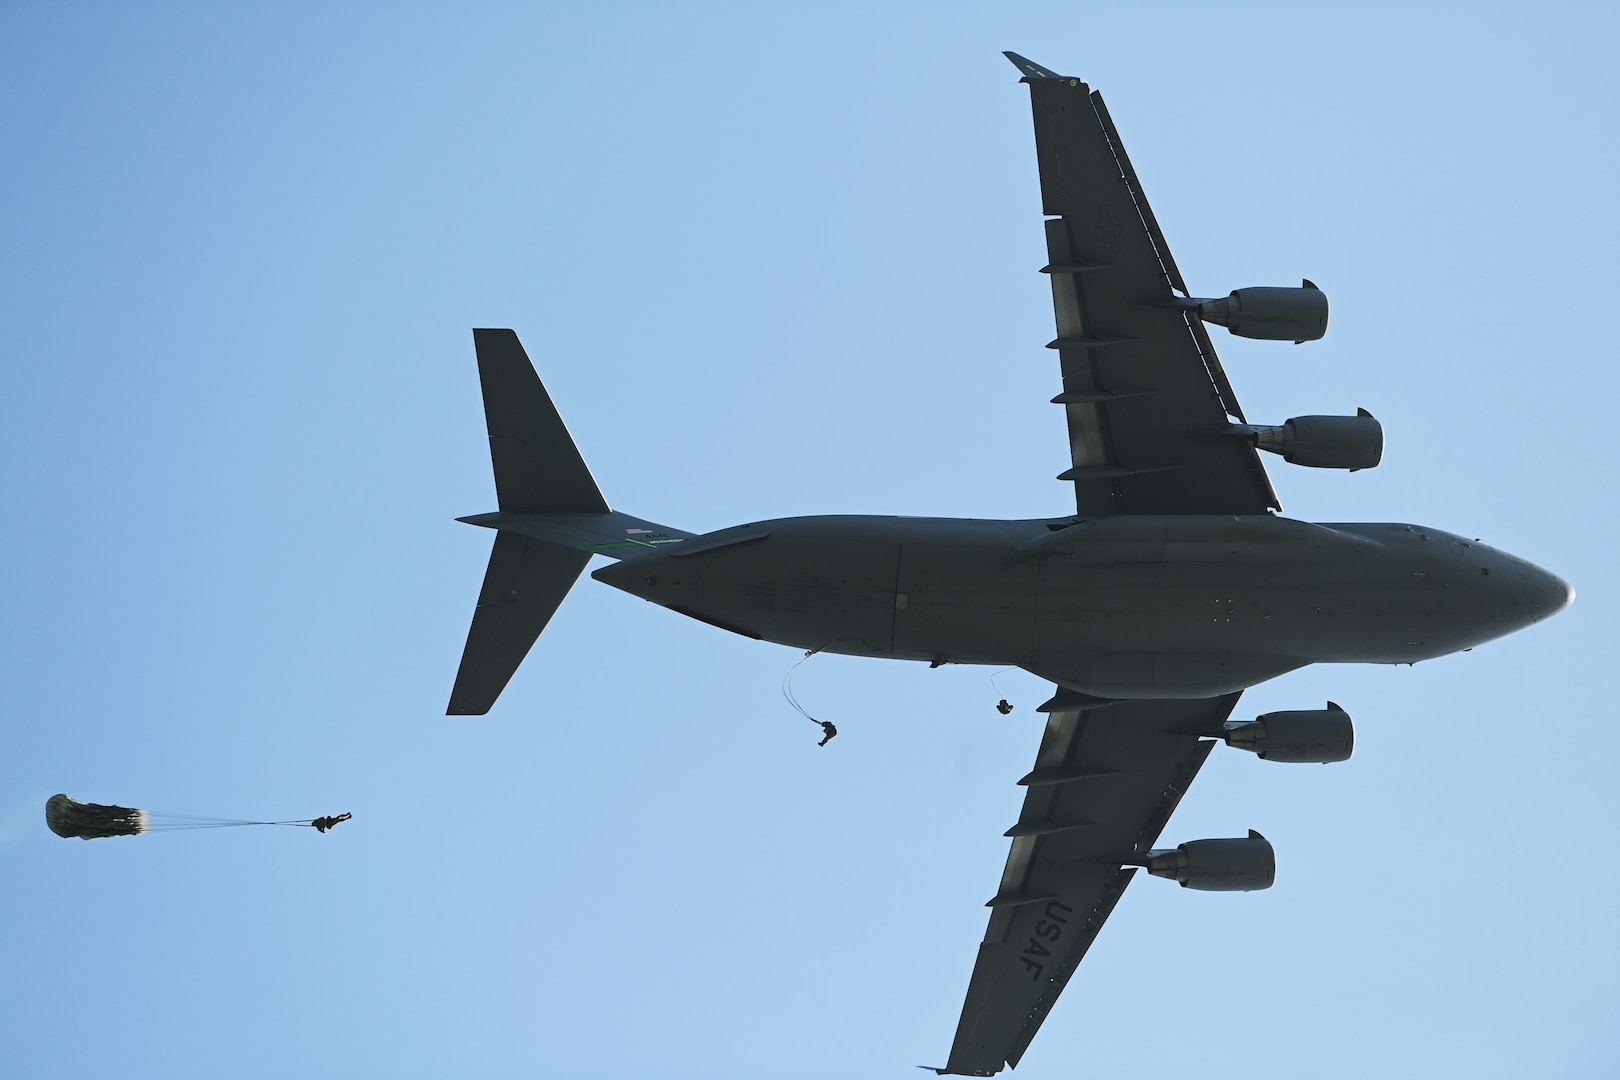 A U.S. C-17 from Joint Base Lewis McChord deploys special operations forces during a static-line parachute jump over Osan Air Base, Republic of Korea, April 18, 2024. Approximately 300 U.S. and Republic of Korea special operations forces personnel participated in a static-line Airborne training operation as part of Korea Flying Training 24, a combined ROK and U.S. exercise running April 12-26. (U.S. Air Force photo by Master Sgt. Eric Burks)